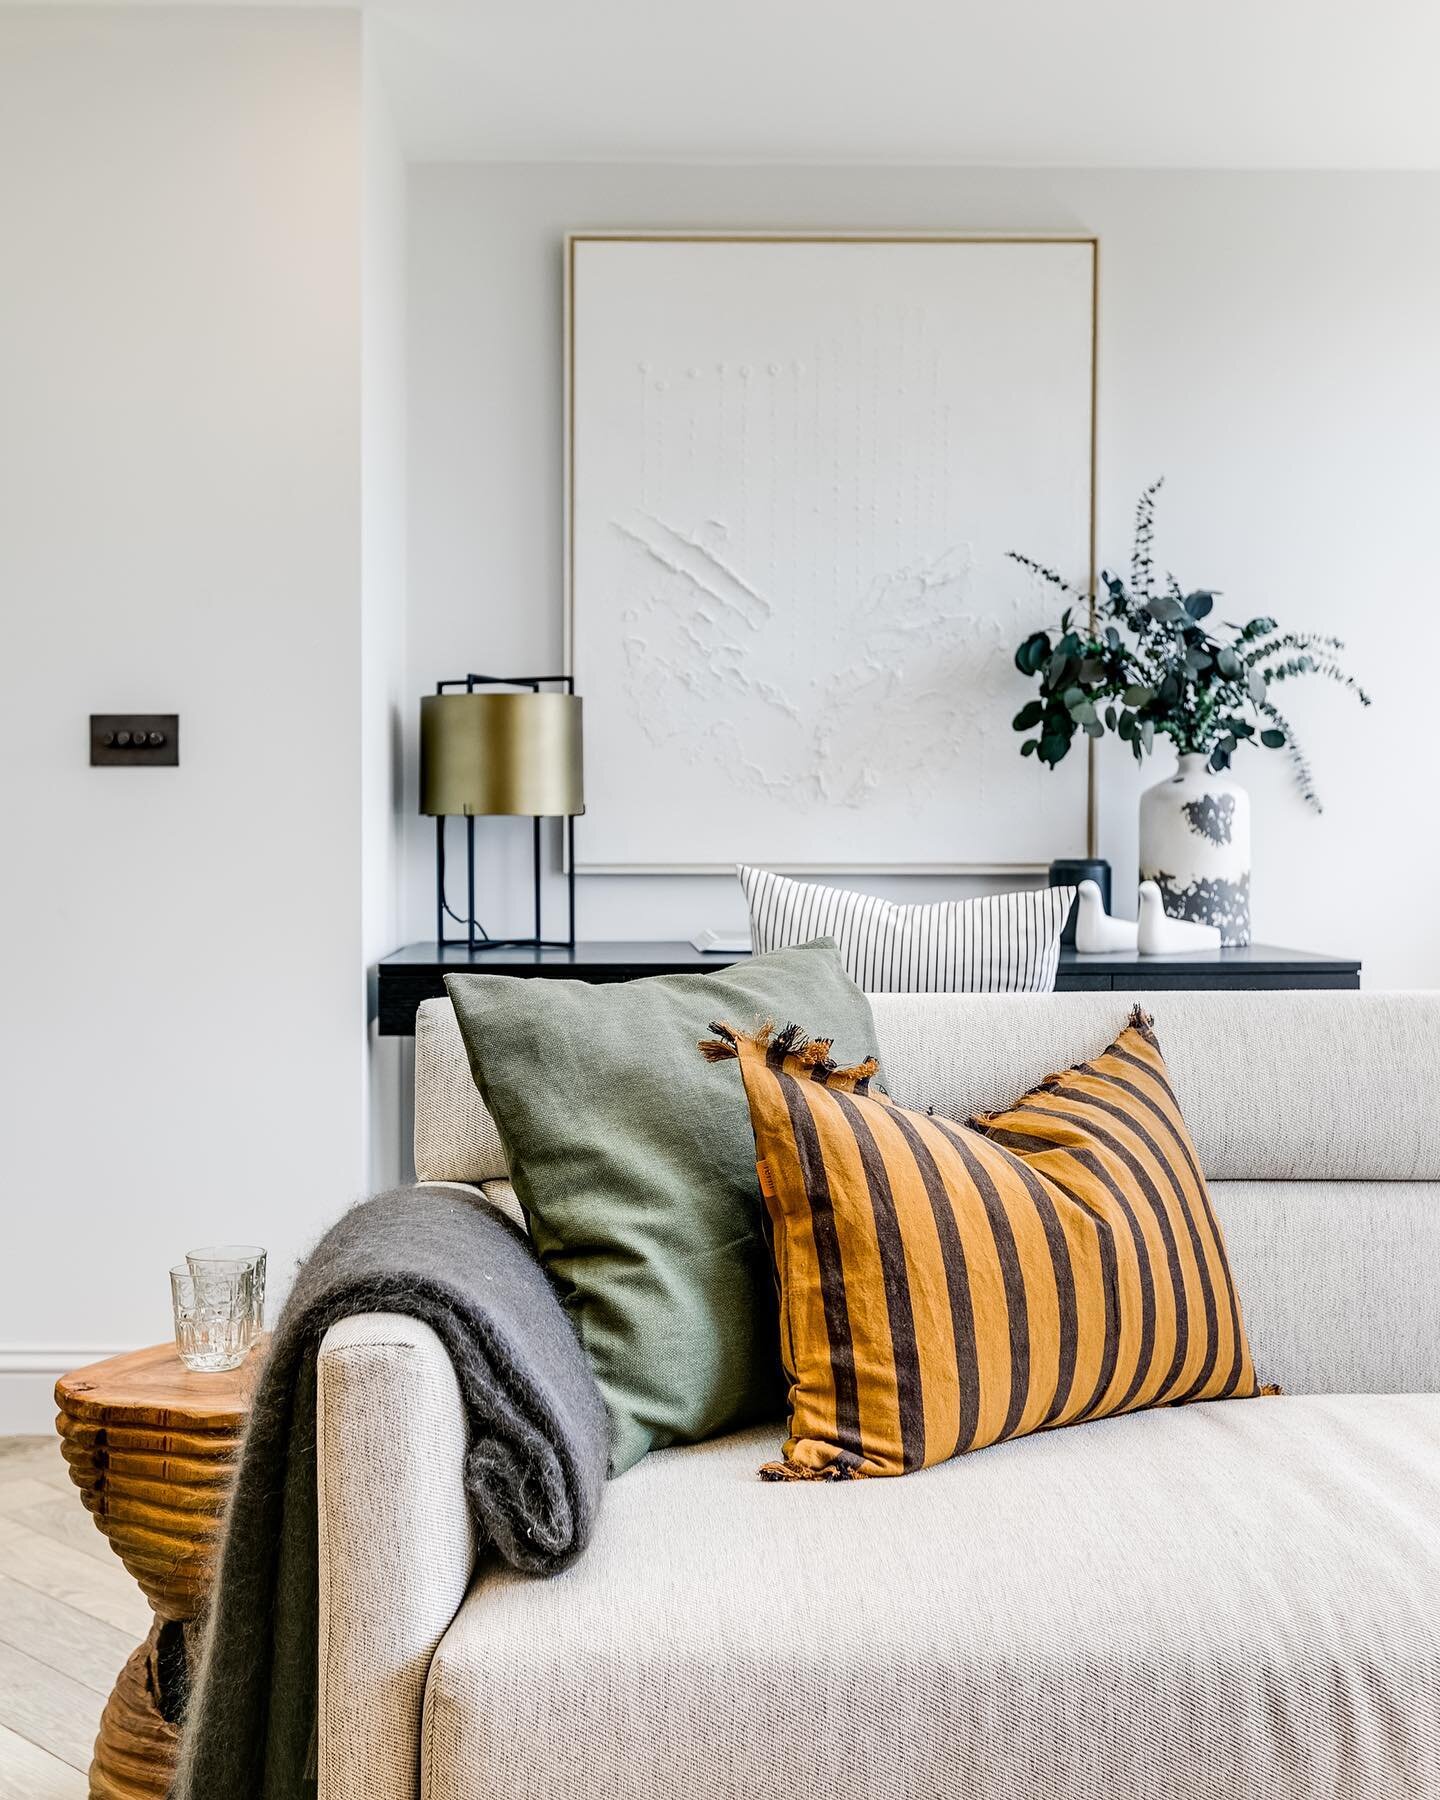 From abstract and extraordinary, to cool and clean, Click London shoots it all. 

Our portfolio of stunning properties is ever growing, if you need photos, floor plans, EPC&rsquo;s or any of our clever CGI services, get at us - www.clicklondon.co.uk